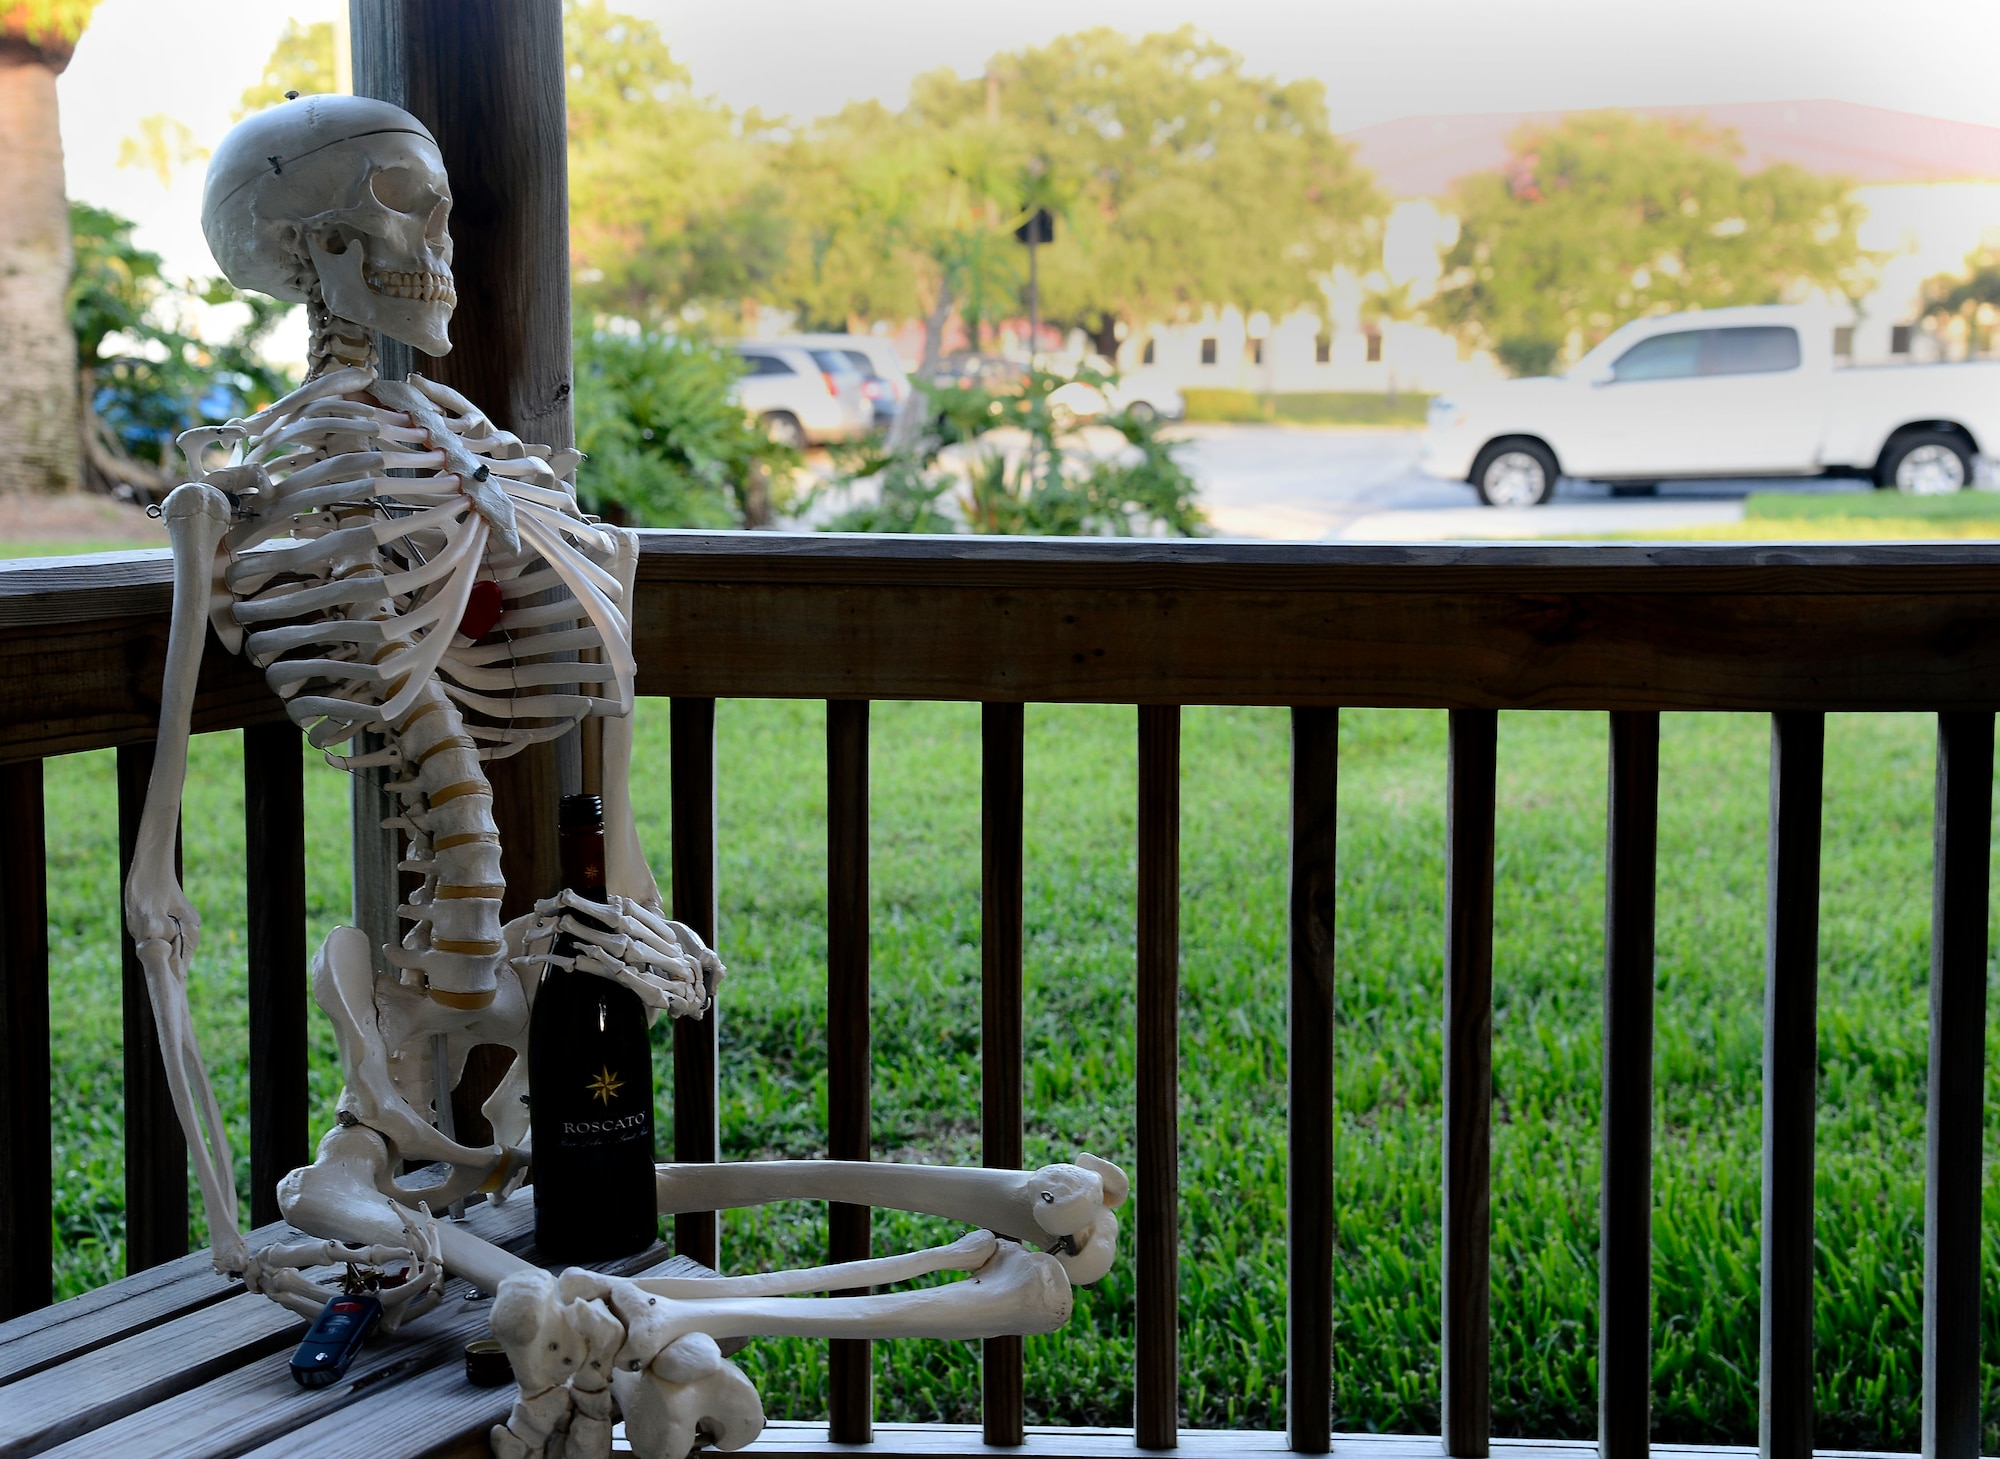 MacBones, 6th Air Mobility Wing safety skeleton, sits down with his car keys and a bottle of alcohol at MacDill Air Force Base, Fla., June 17, 2014. Drinking and driving not only endangers yourself, but everyone around you. (U.S. Air Force photo by Airman 1st Class Tori Schultz/Released)